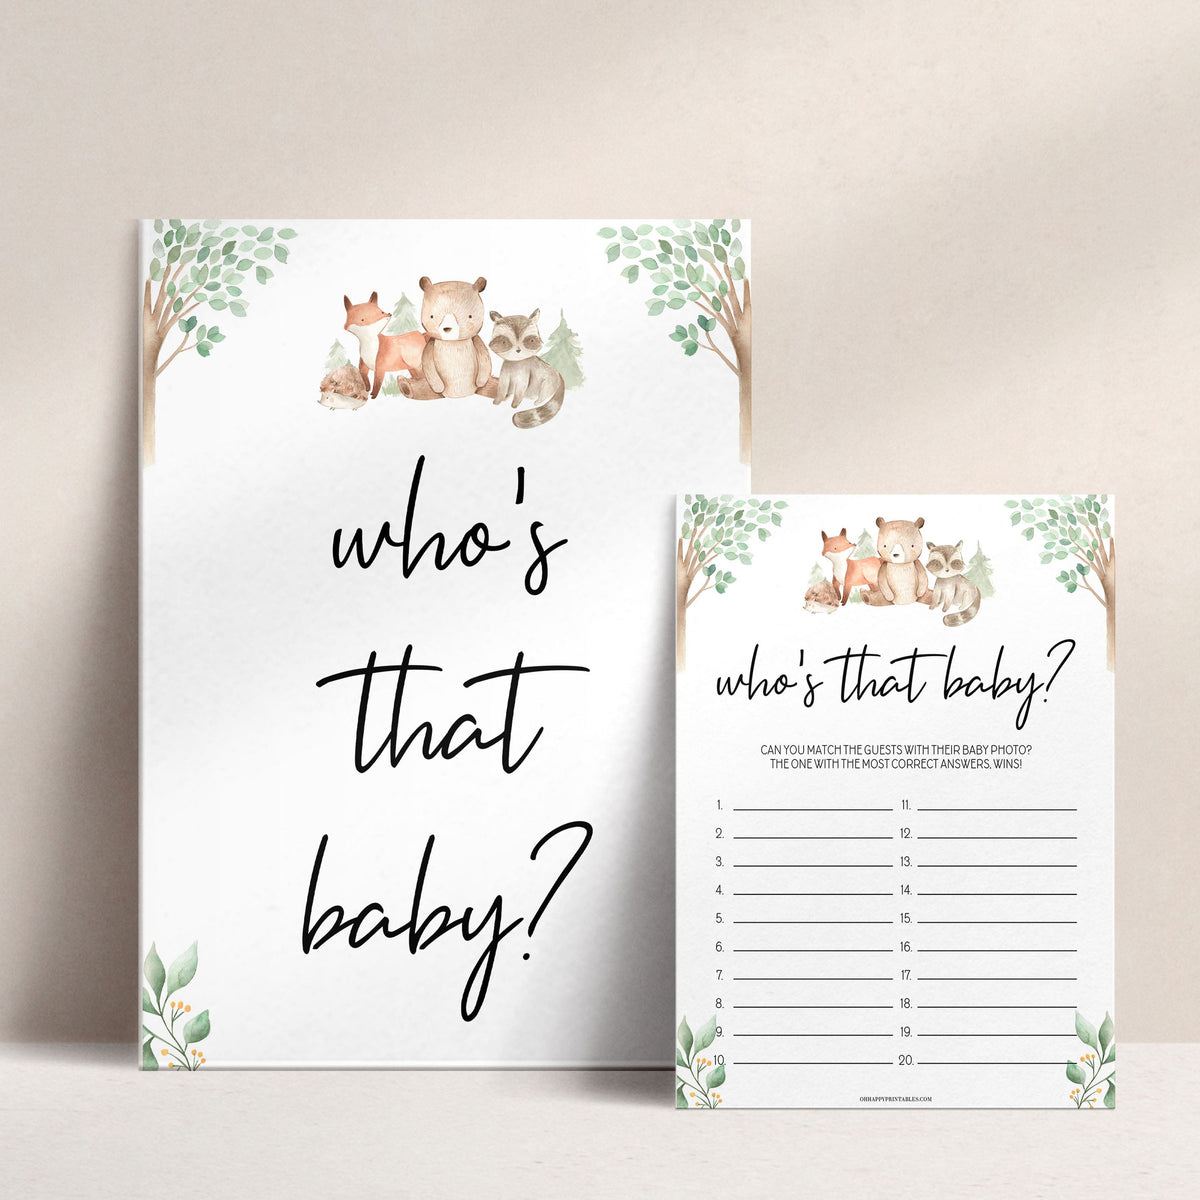 who's that baby game, Printable baby shower games, woodland animals baby games, baby shower games, fun baby shower ideas, top baby shower ideas, woodland baby shower, baby shower games, fun woodland animals baby shower ideas